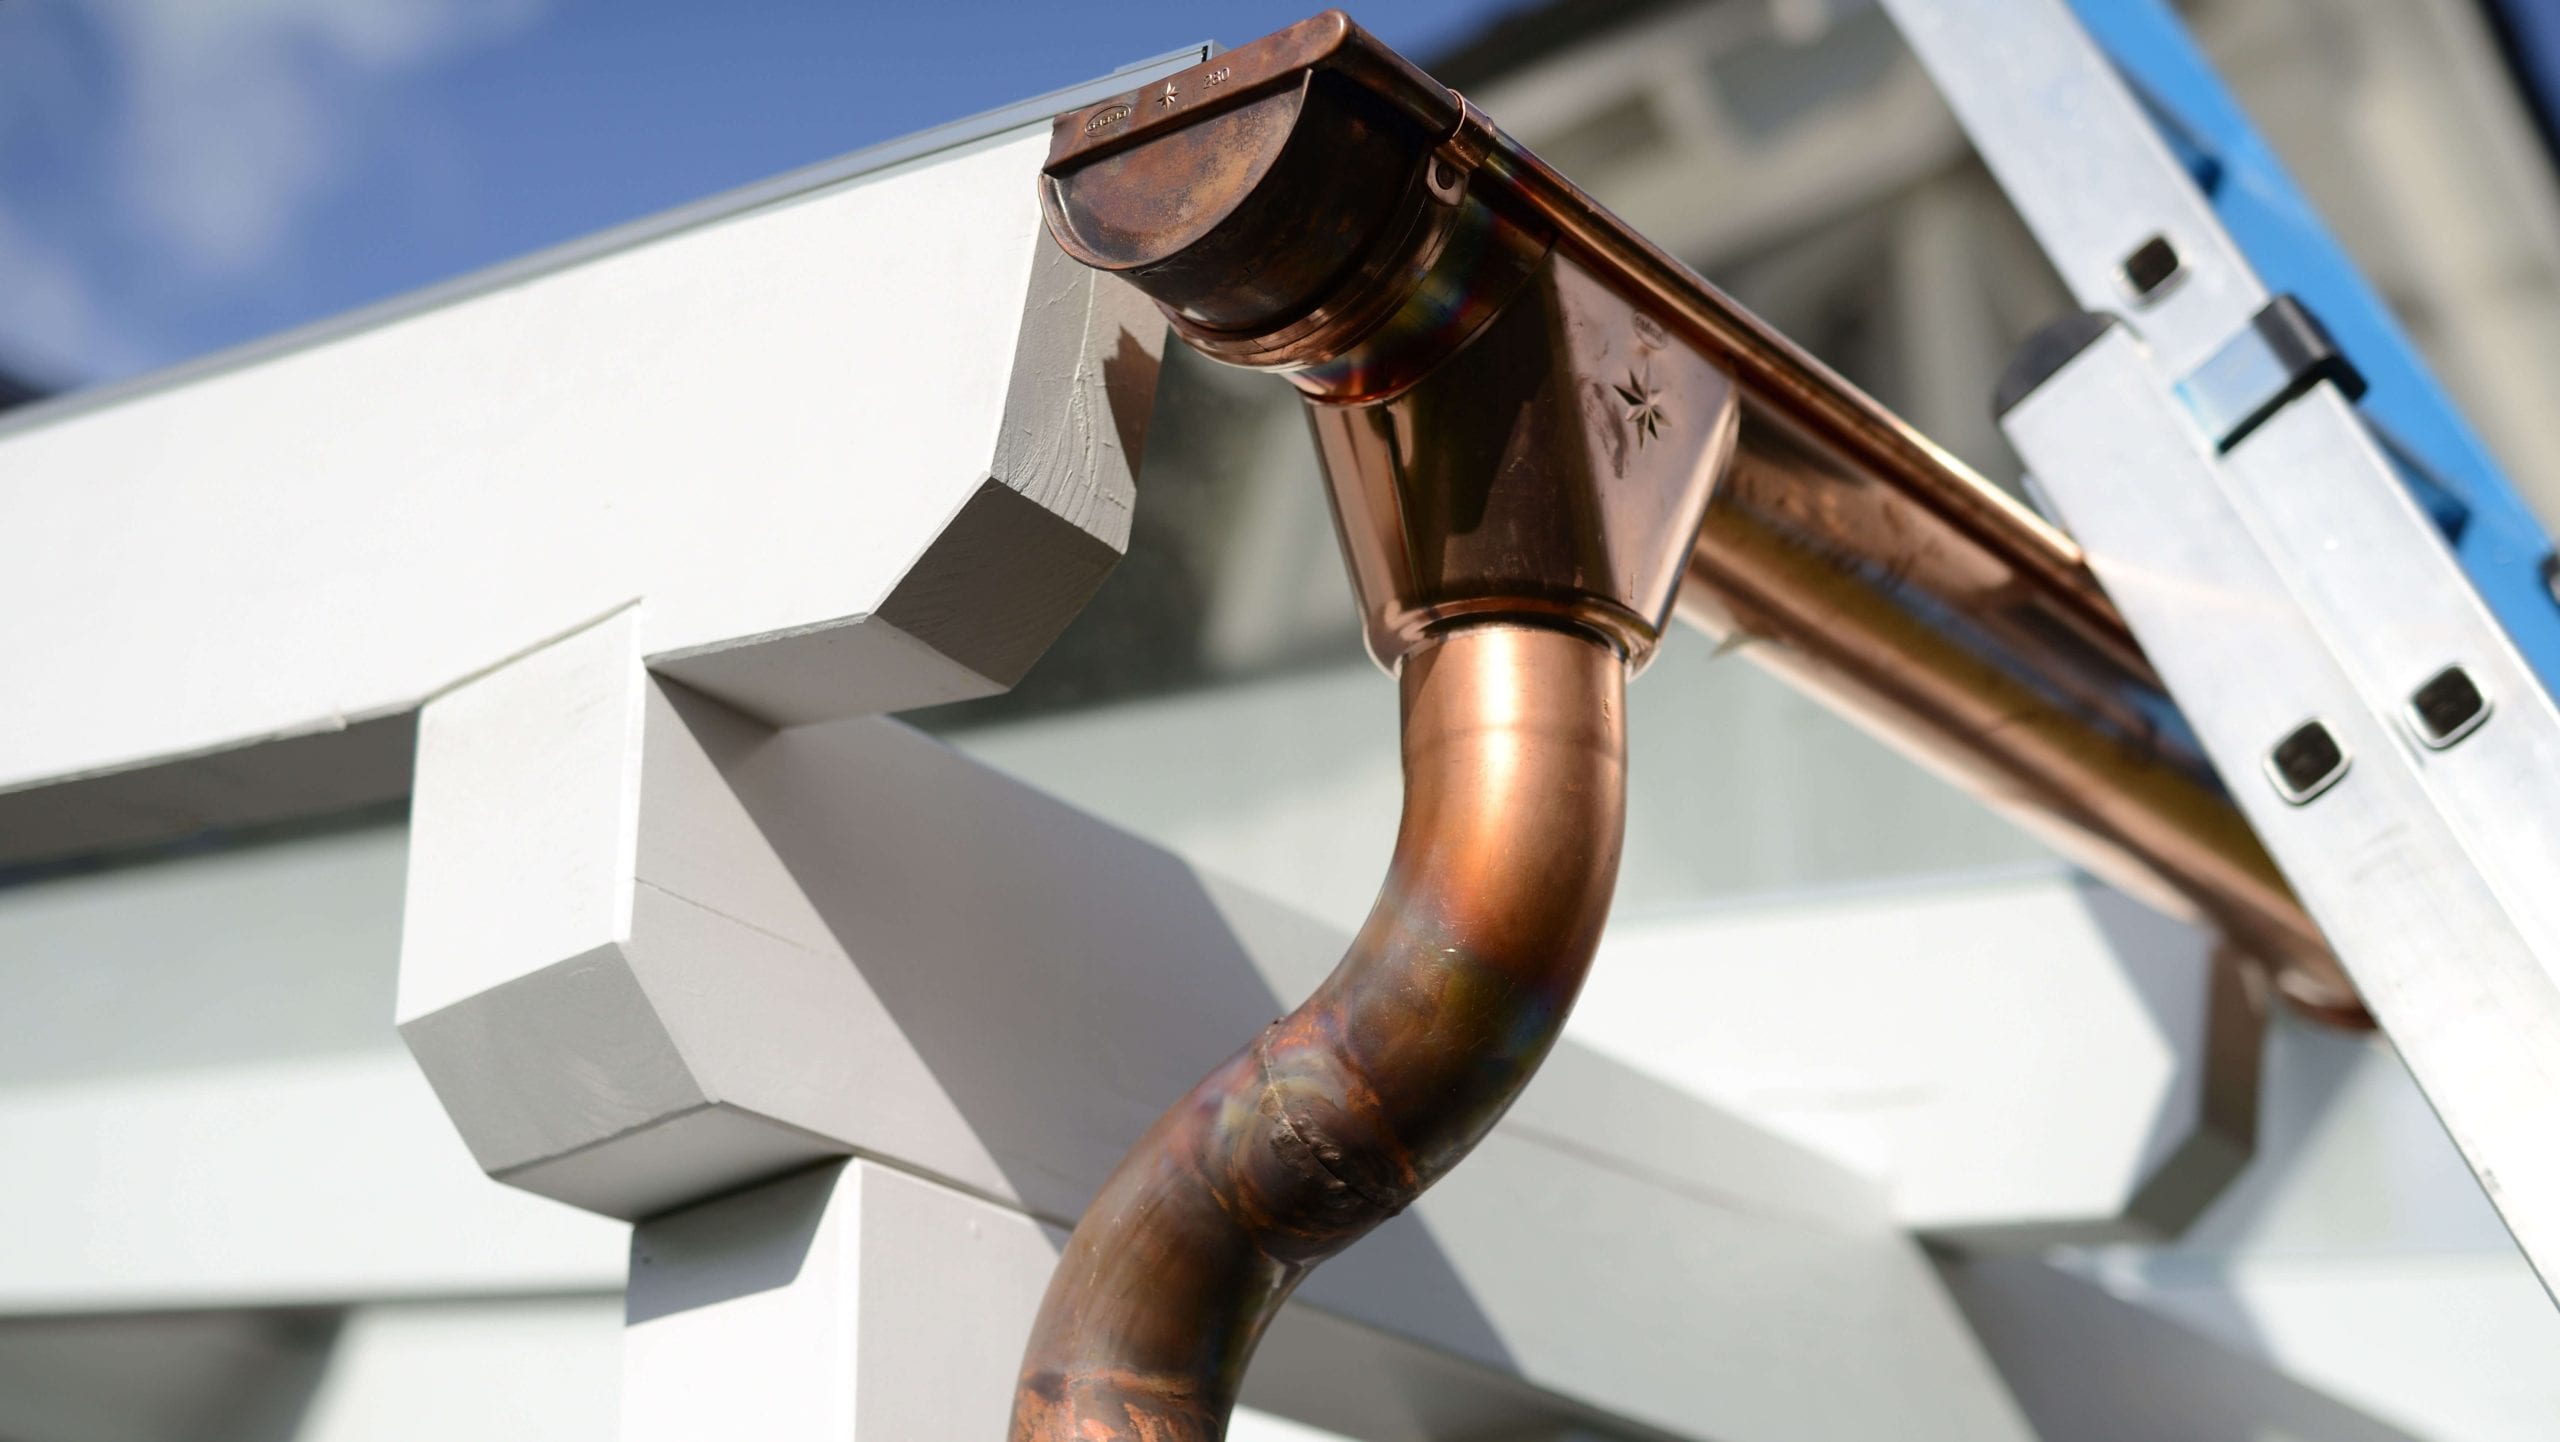 Make your property stand out with copper gutters. Contact for gutter installation in Cumming